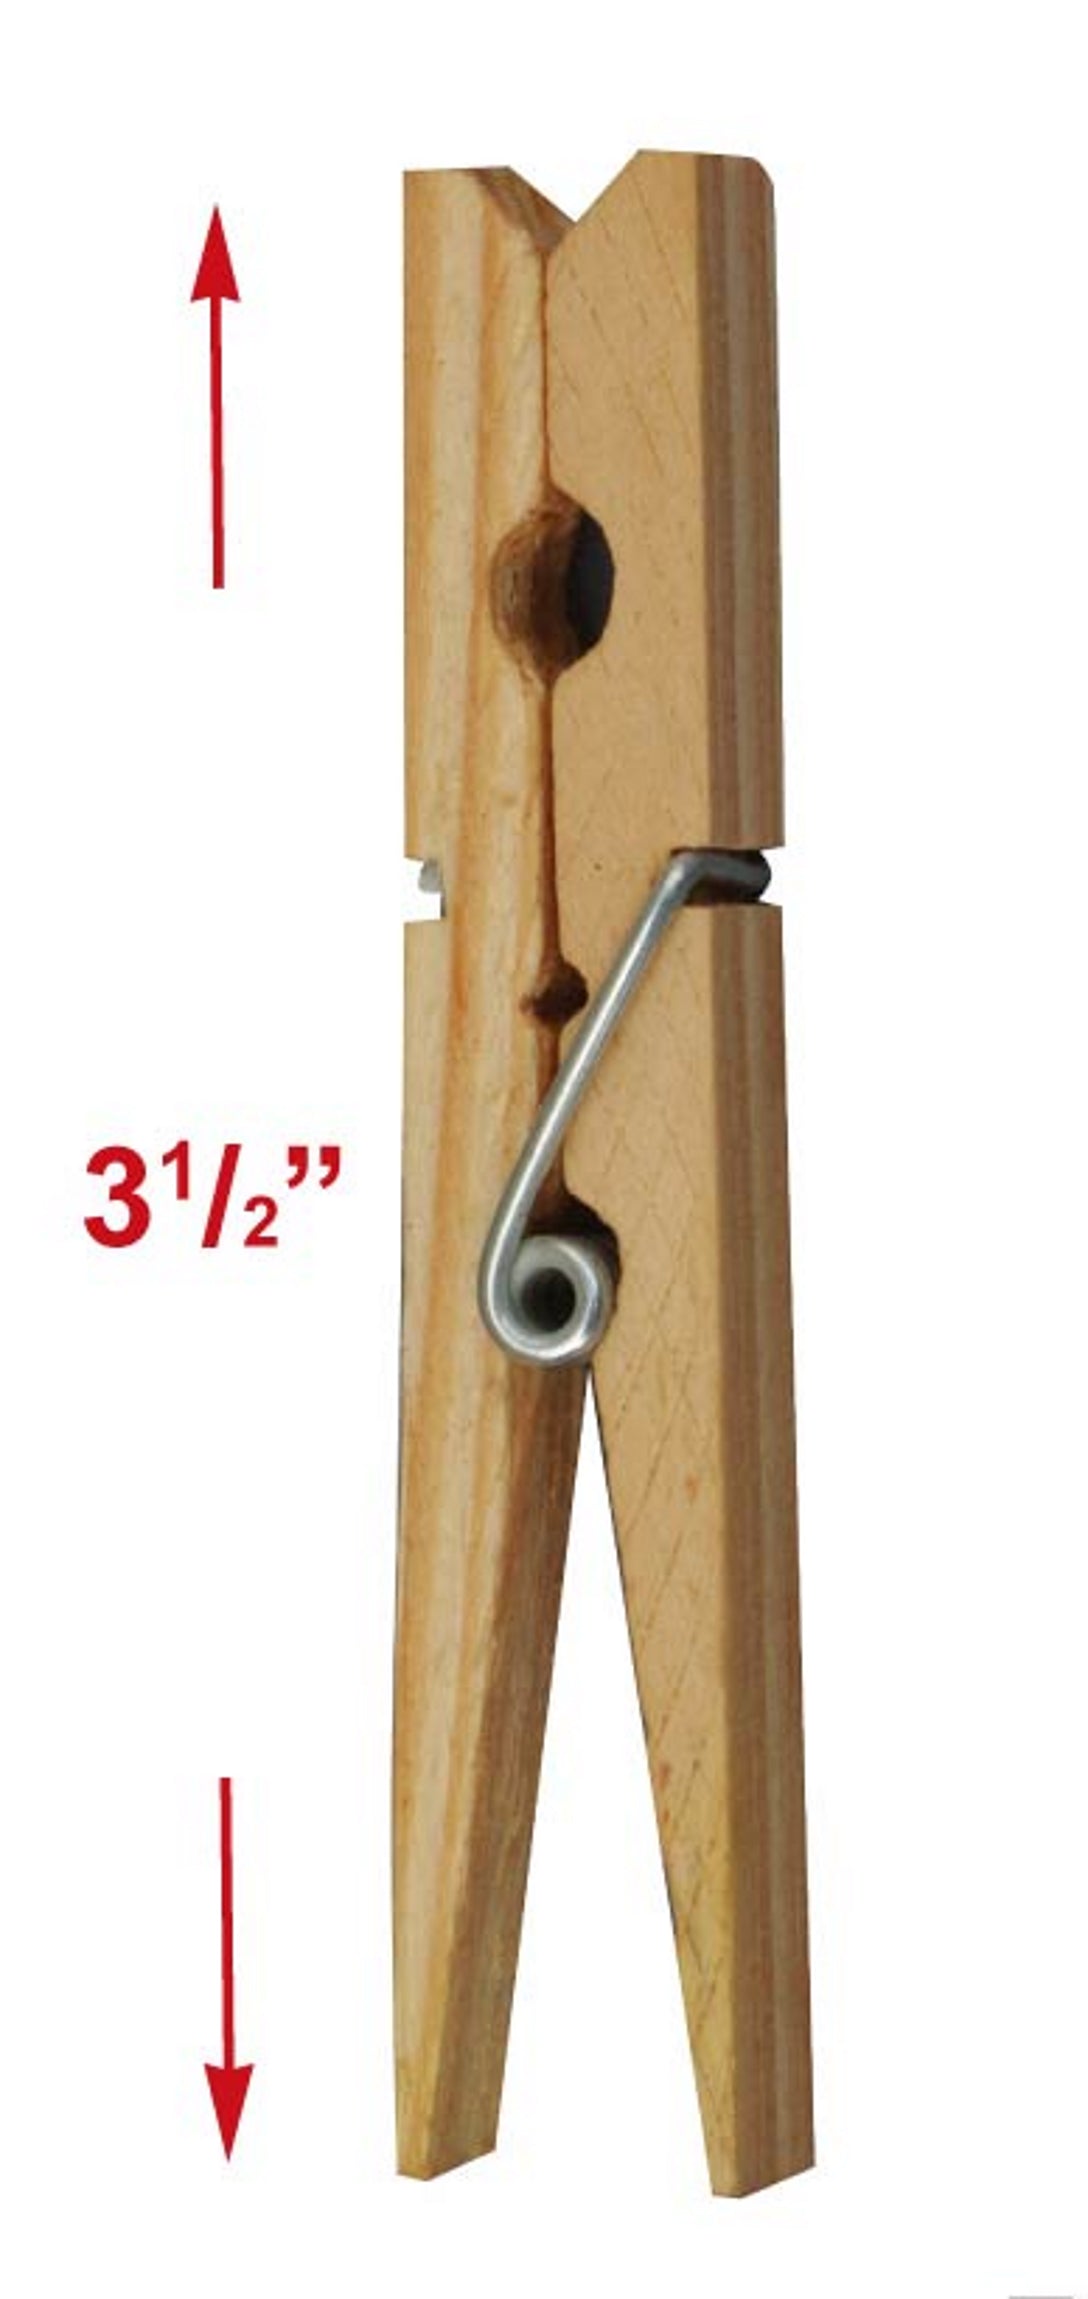 Wooden Clothes Pins - 24 Pcs Close Wire Springs - Drying, Hanging, Clothes, Laundry and Linens 3½" Long - TriSonic